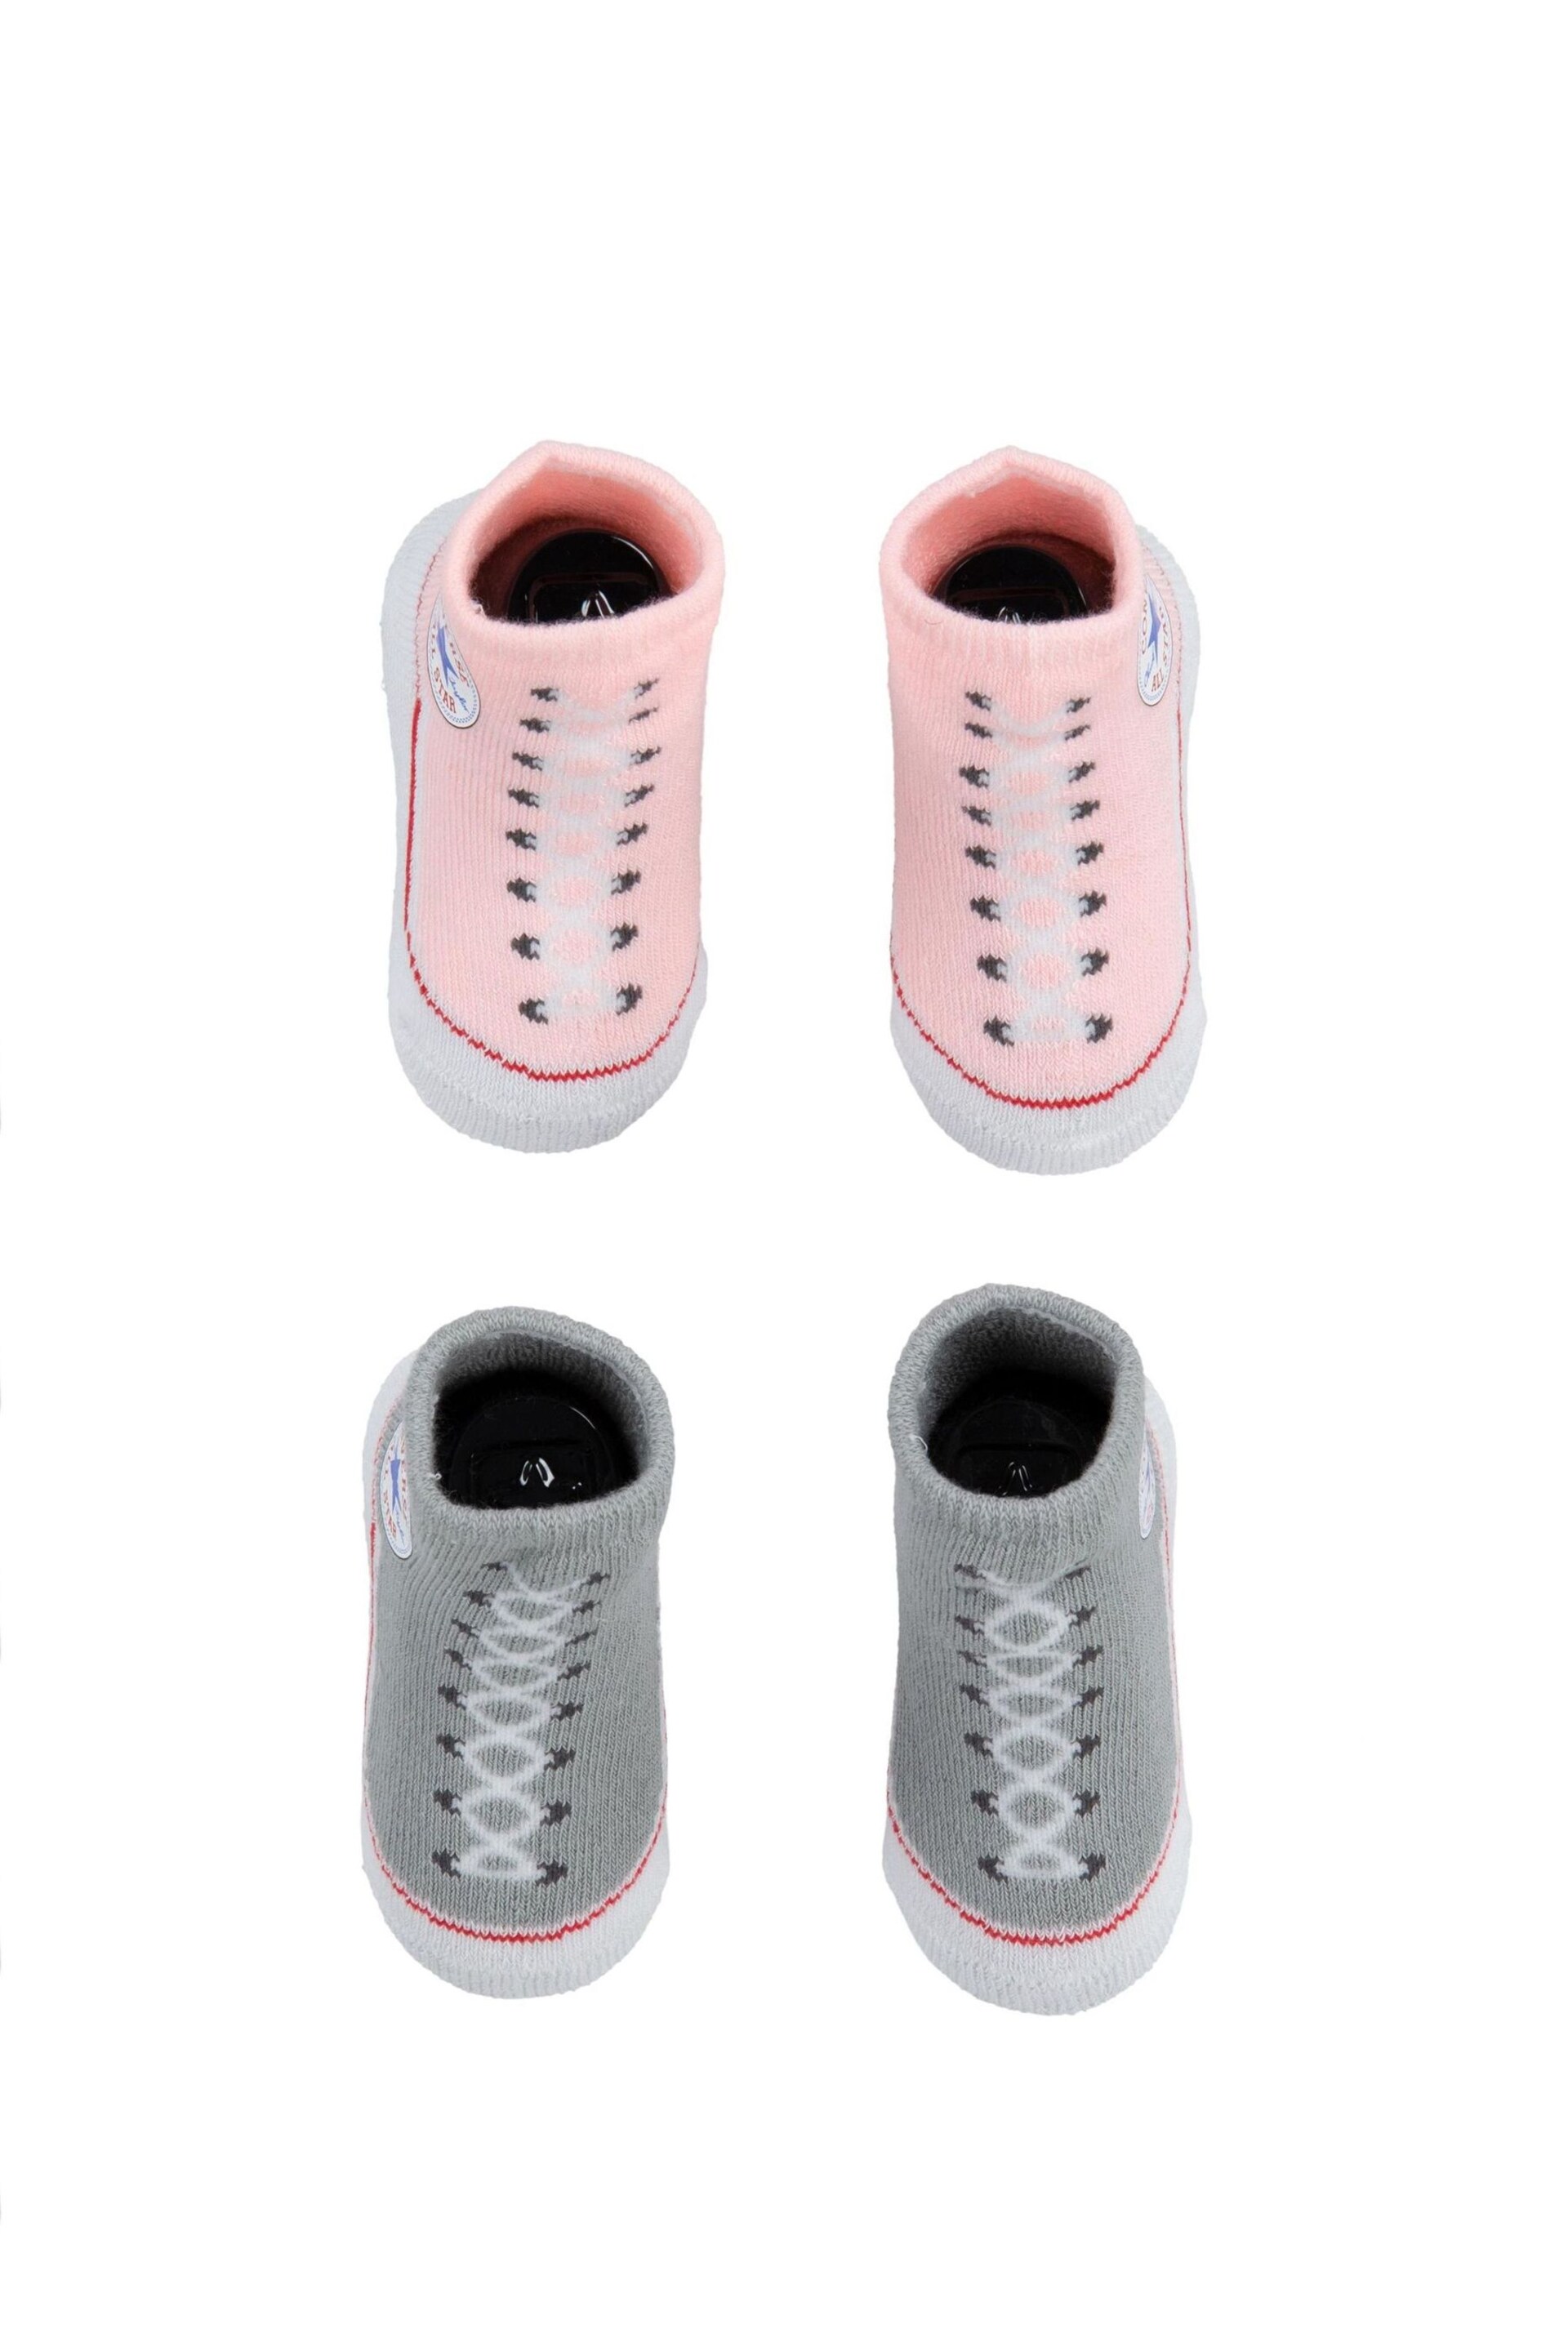 Converse Pink Chuck Booties 2 Pack - Image 1 of 3